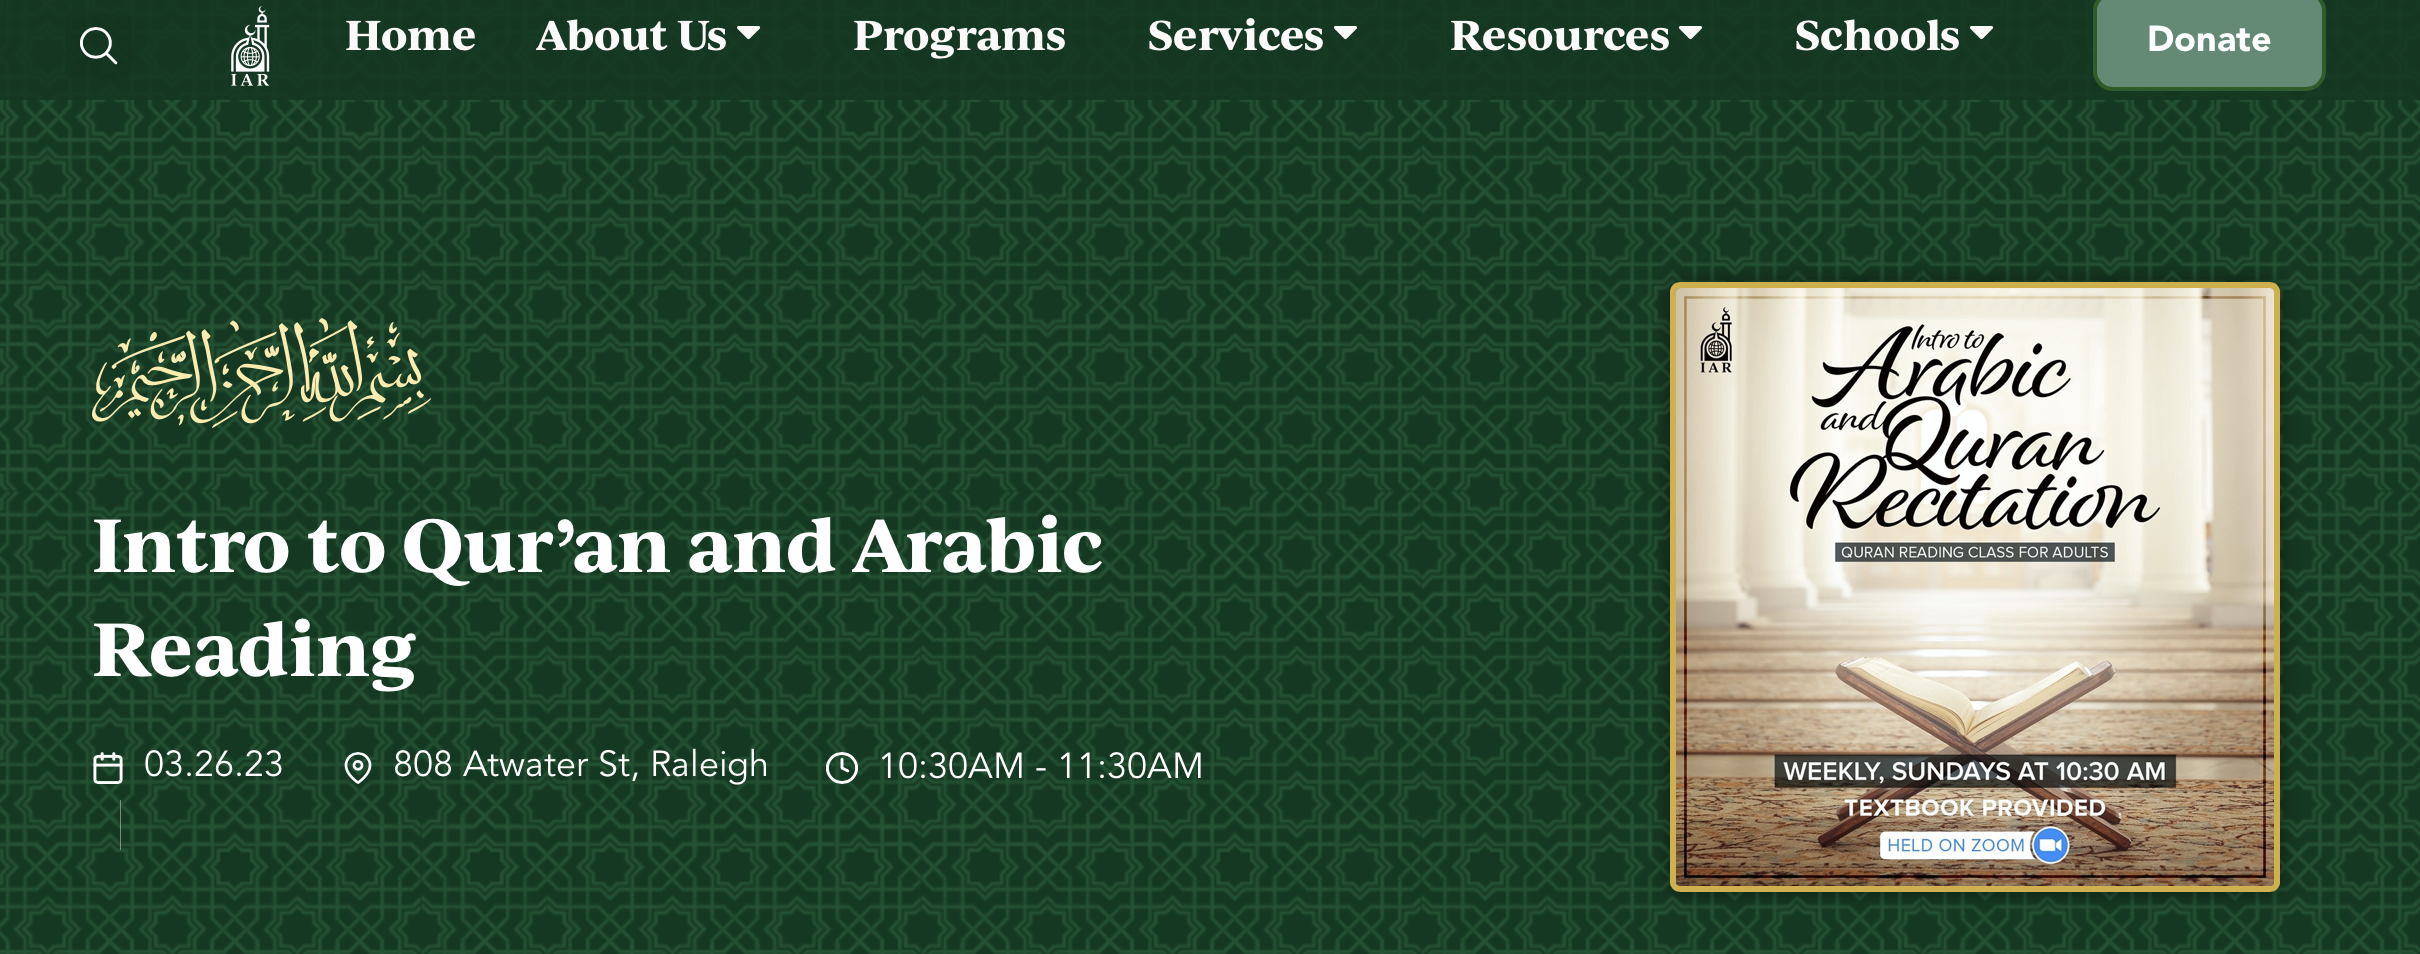 Intro to Qur’an and Arabic Reading